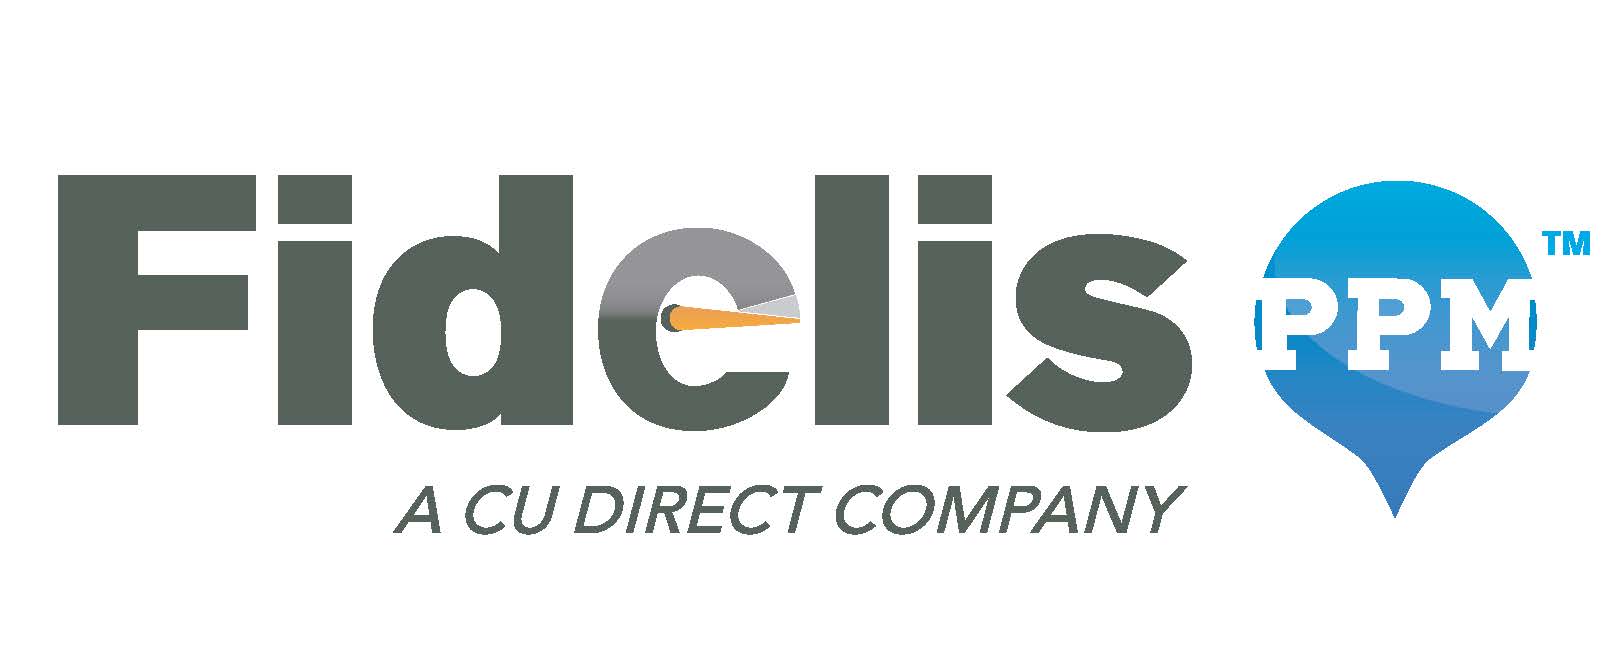 Fidelis PPM prepaid maintenance drives customer retention and grows the dealership service business